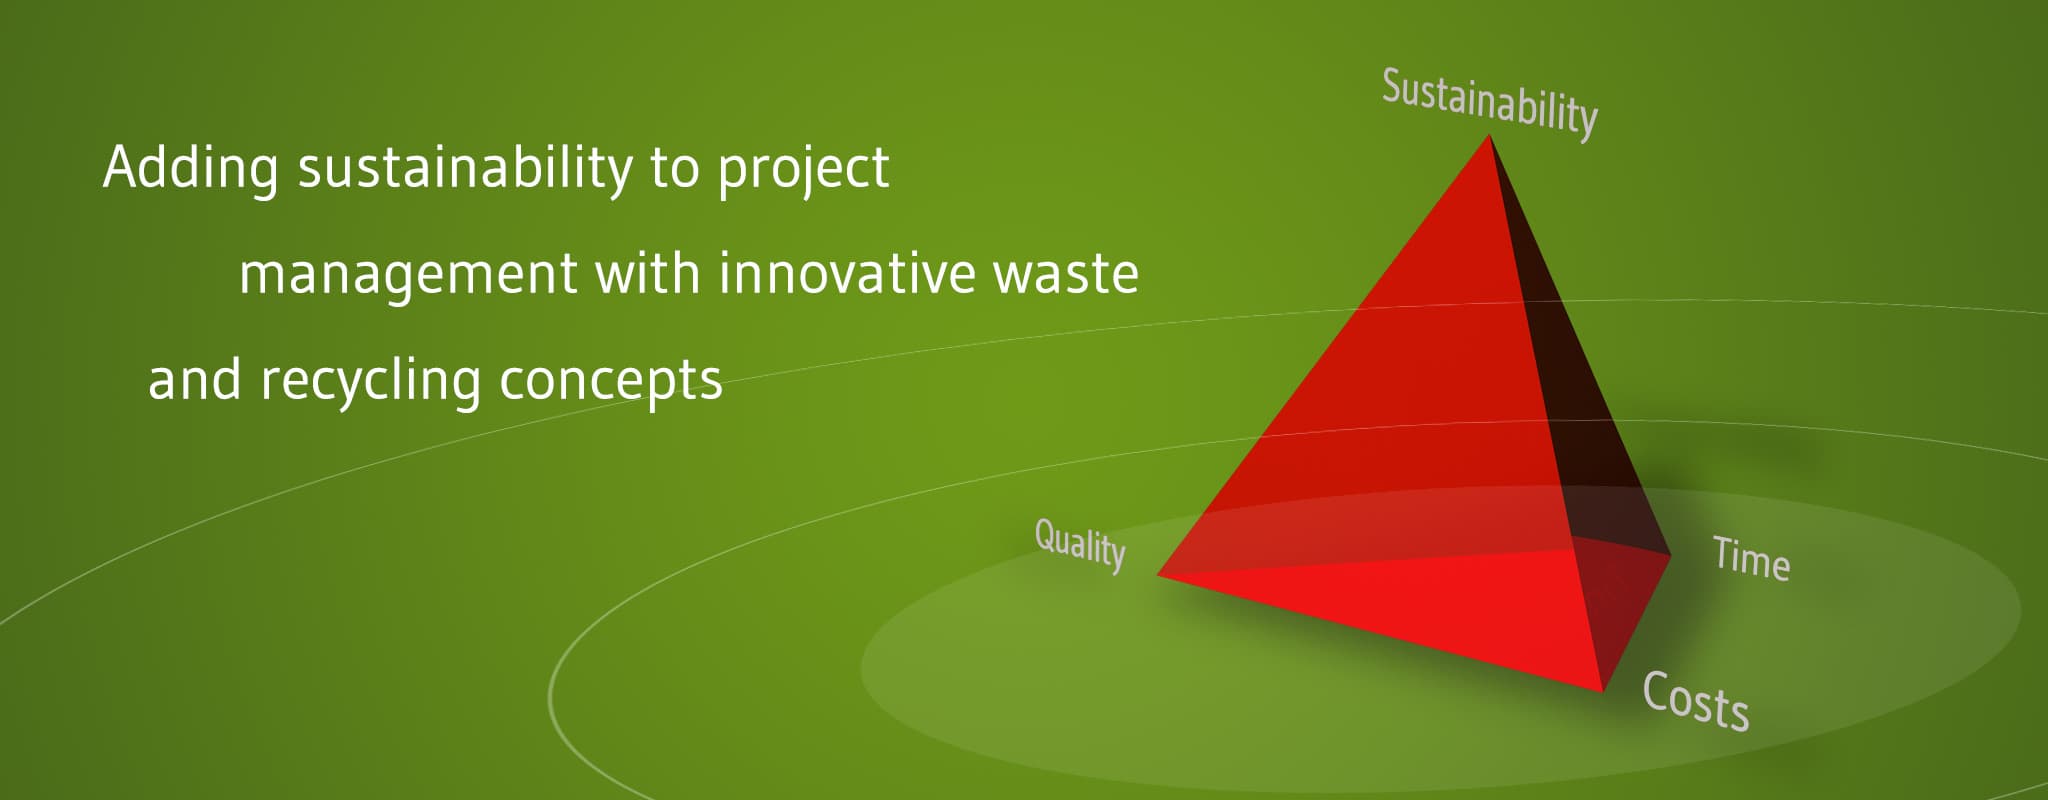 Adding value to projects with sustainable mineral waste solutions rx_sol_home-slide_tetraeder_-2en.jpg